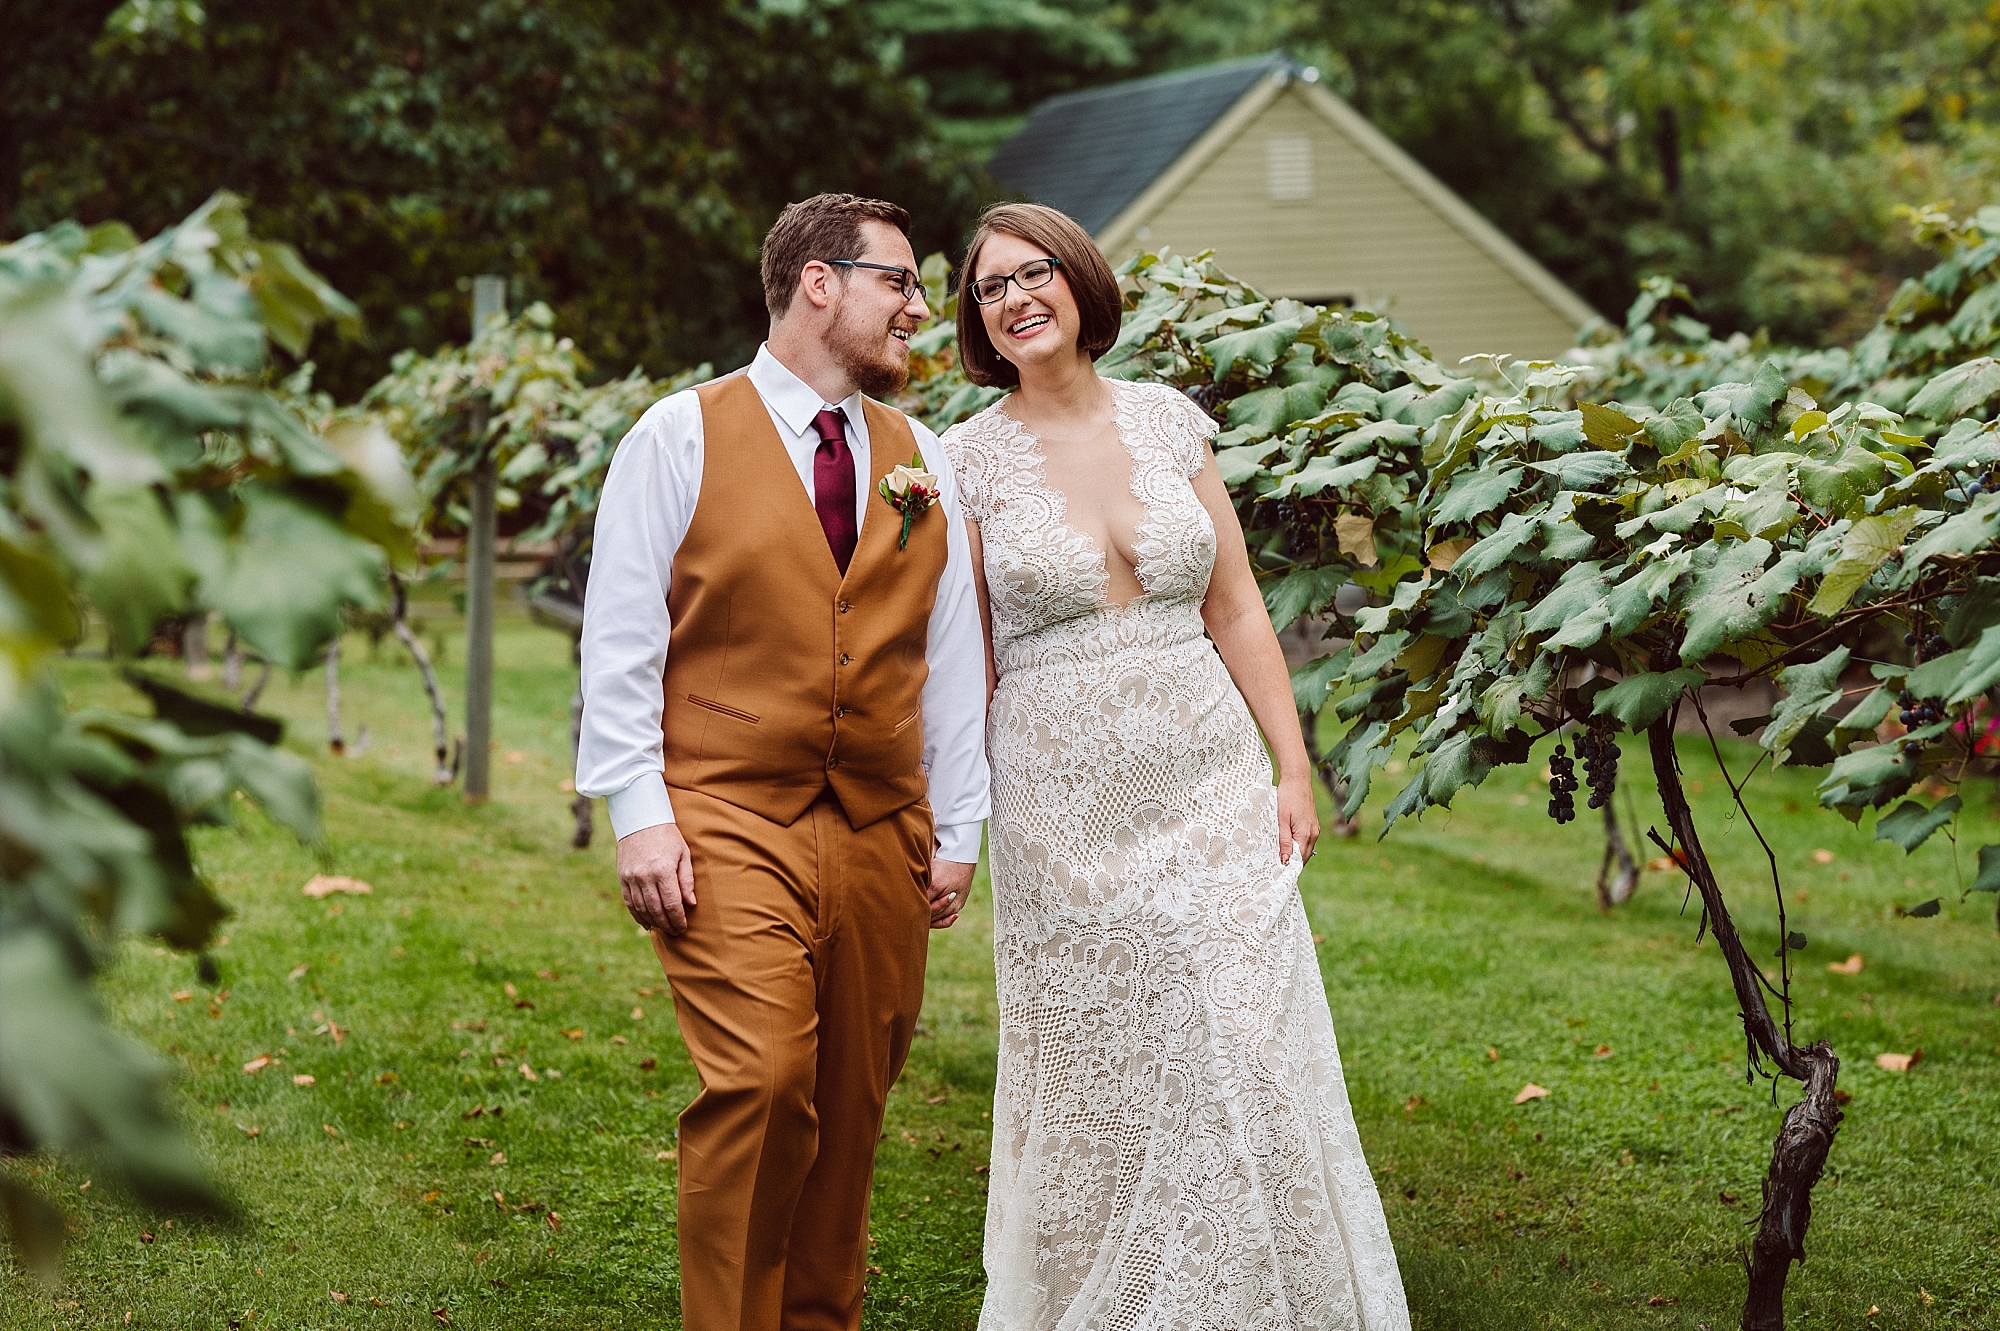 bride and groom portraits at crossing vineyards and winery in bucks county, pa